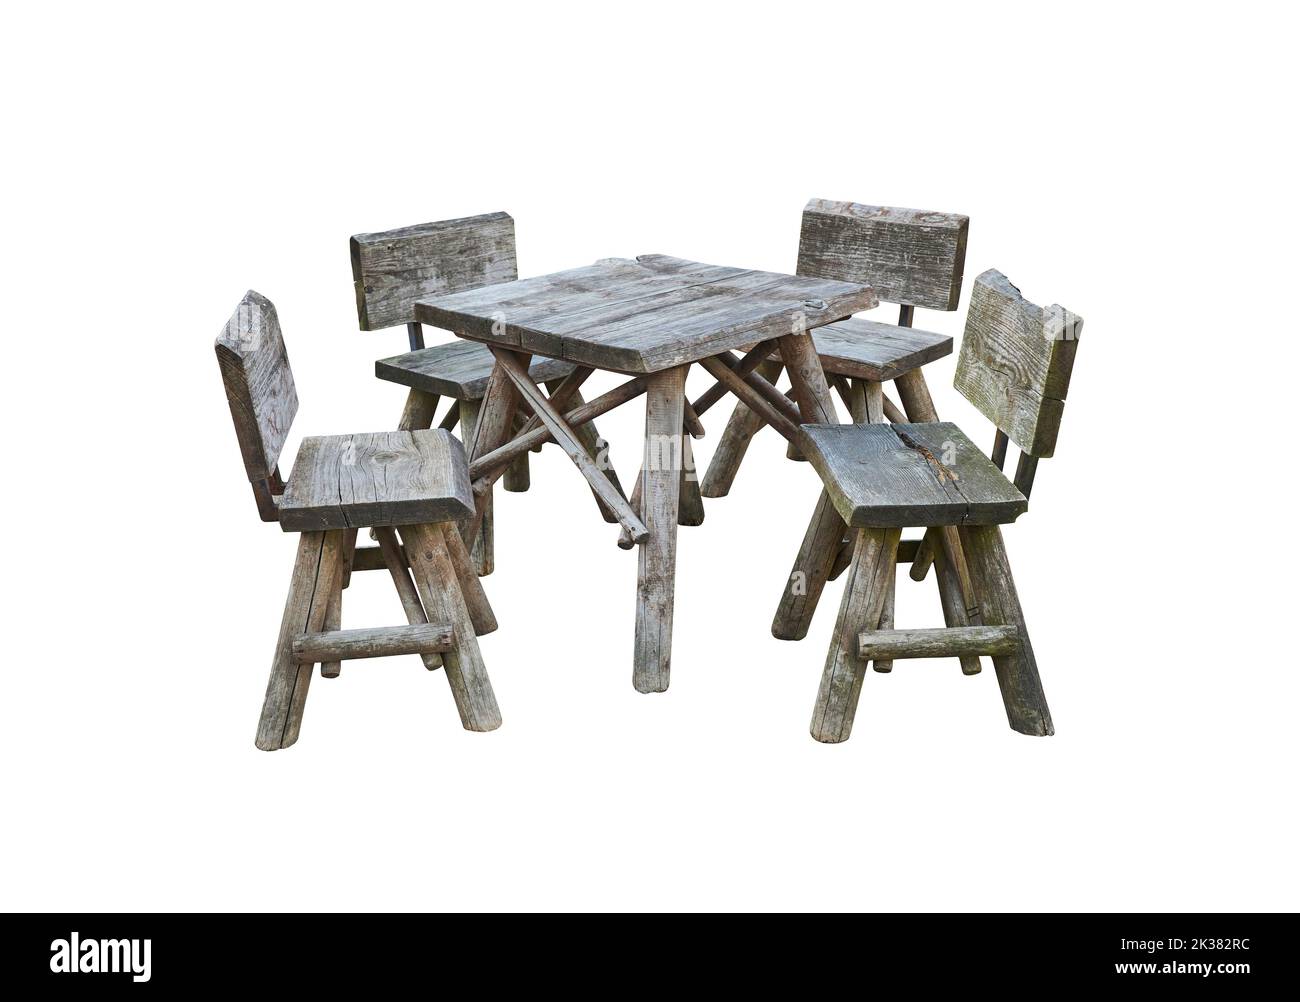 Old wooden outdoor table and chairs on a white background Stock Photo